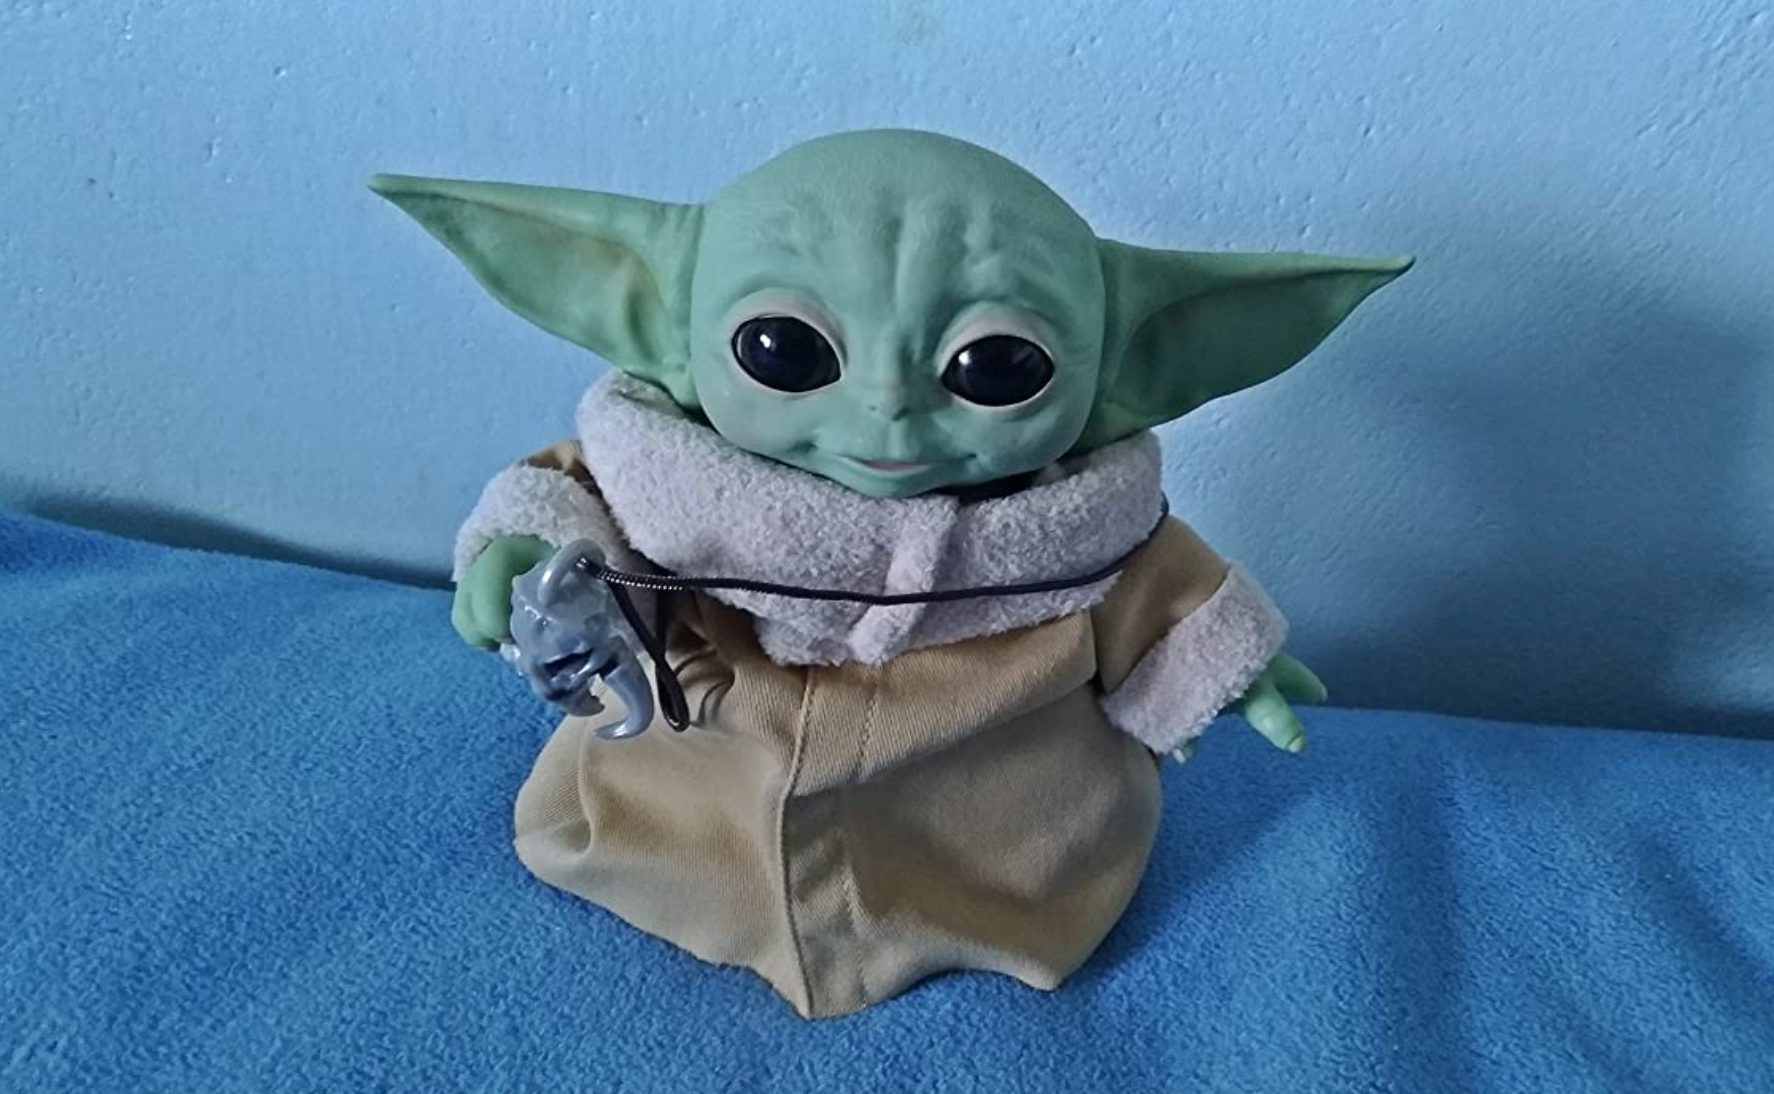 The Mandalorian gave beloved character “Baby Yoda” a real name, and it's  really not what anyone wanted - The Georgetown Voice